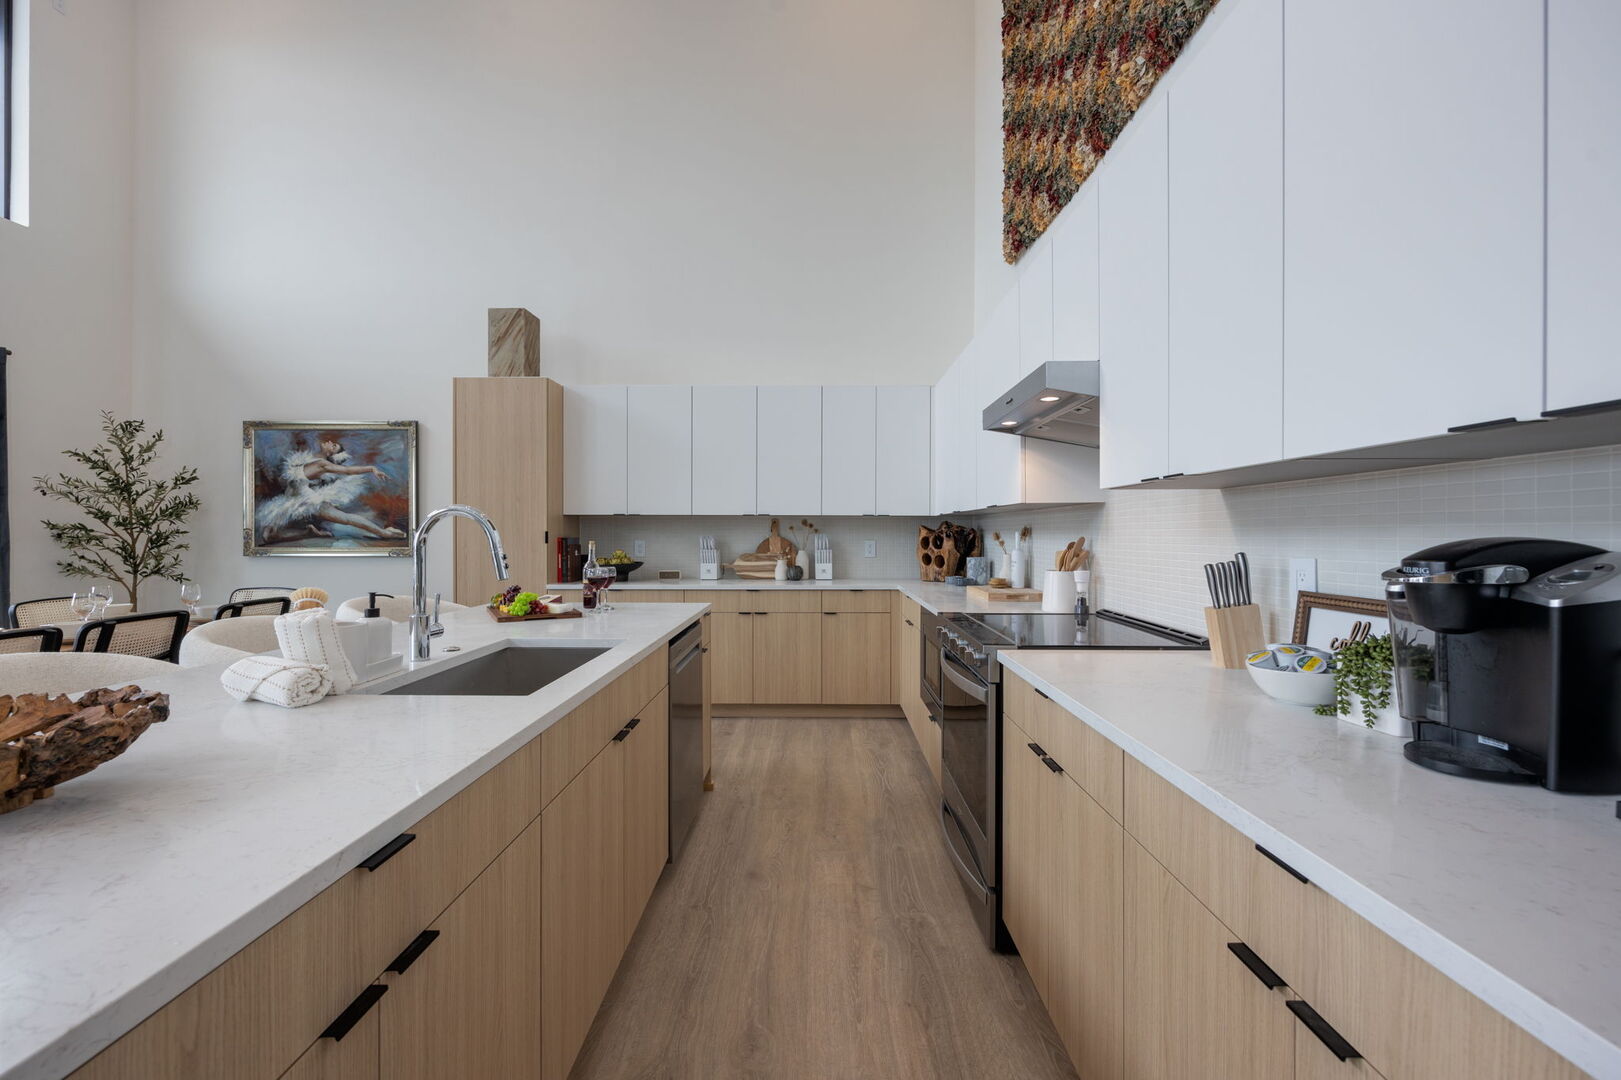 Main Level: Fully equipped kitchen with stainless-steel appliances and essential supplies, complemented by a bar seating for 4, seamlessly connecting to the spacious dining area for a perfect blend of functionality and style.